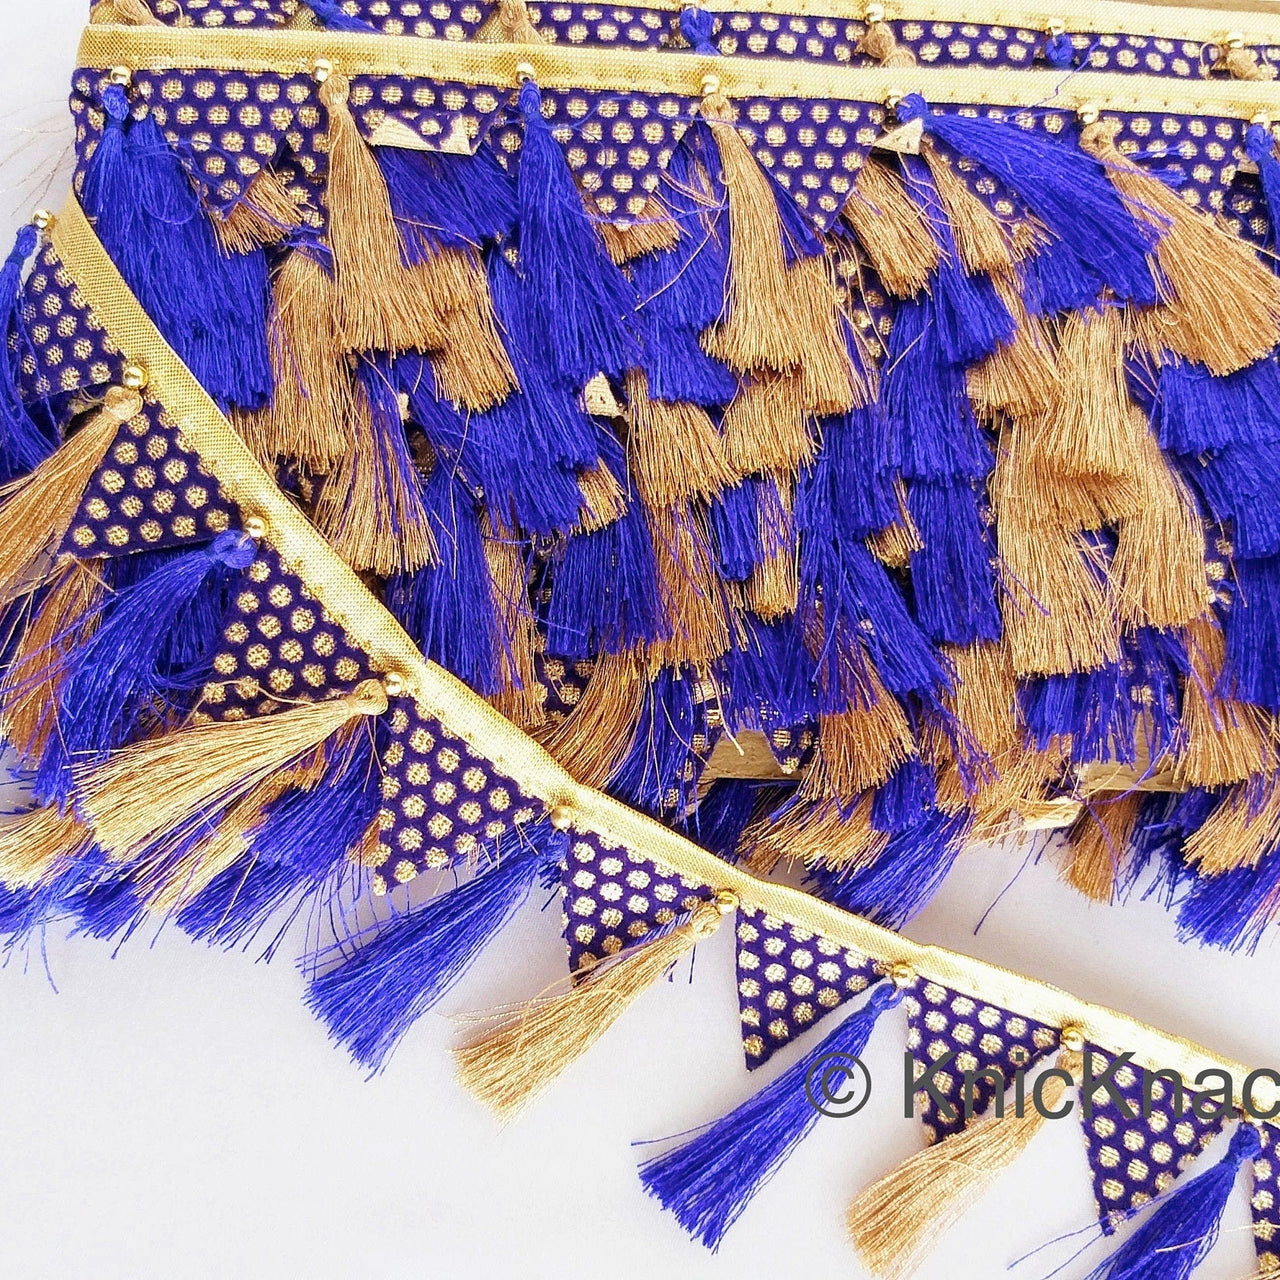 Gold Fringe Bunting Trim In Royal Blue & Gold Check Pattern With Royal Blue And Copper Thread Tassels, Decorative Trim, Tassels Trim